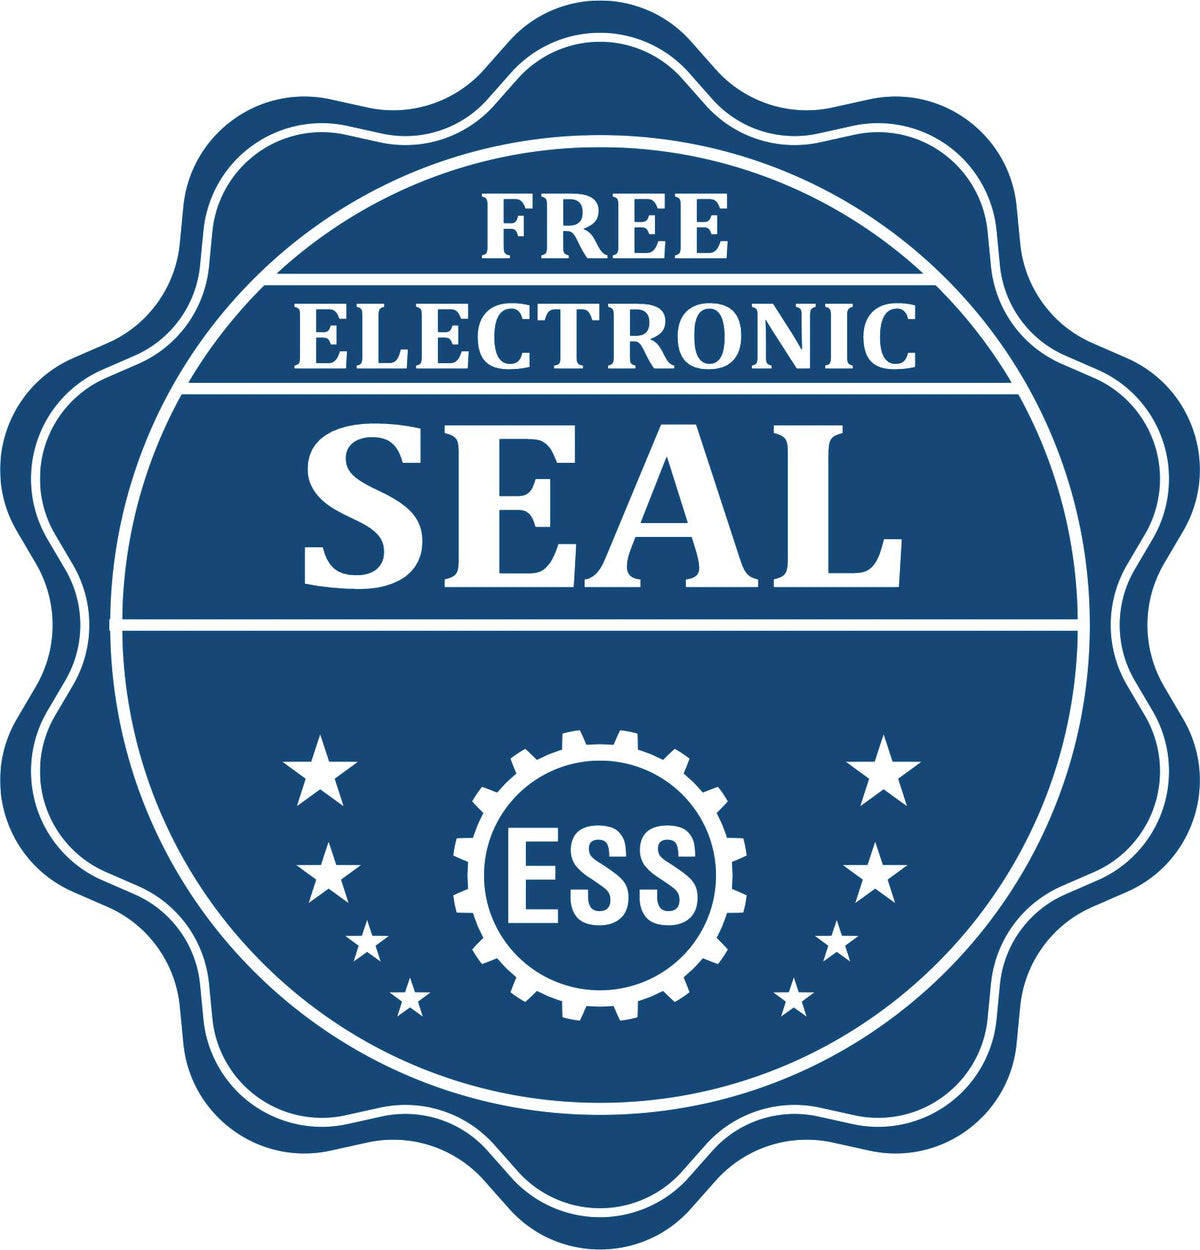 A badge showing a free electronic seal for the Slim Pre-Inked New York Professional Geologist Seal Stamp with stars and the ESS gear on the emblem.